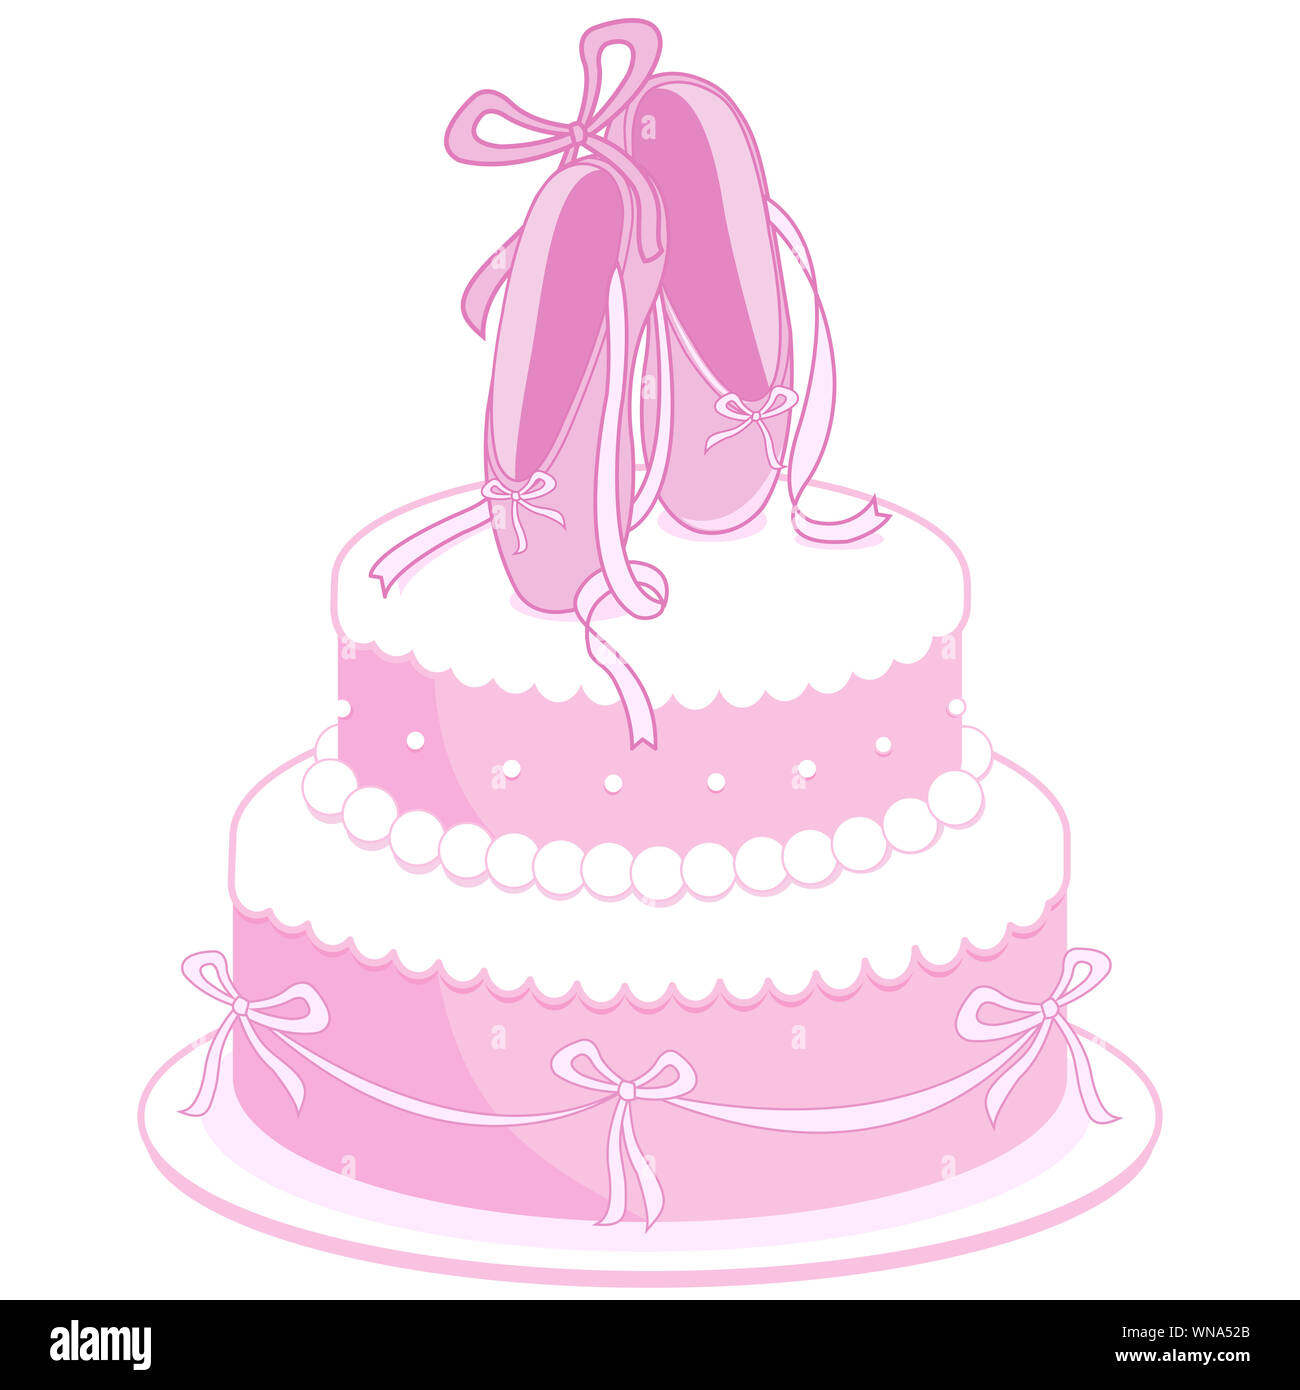 Illustration of a girl’s birthday cake decorated with ballet shoes, pearls and ribbons. Stock Photo